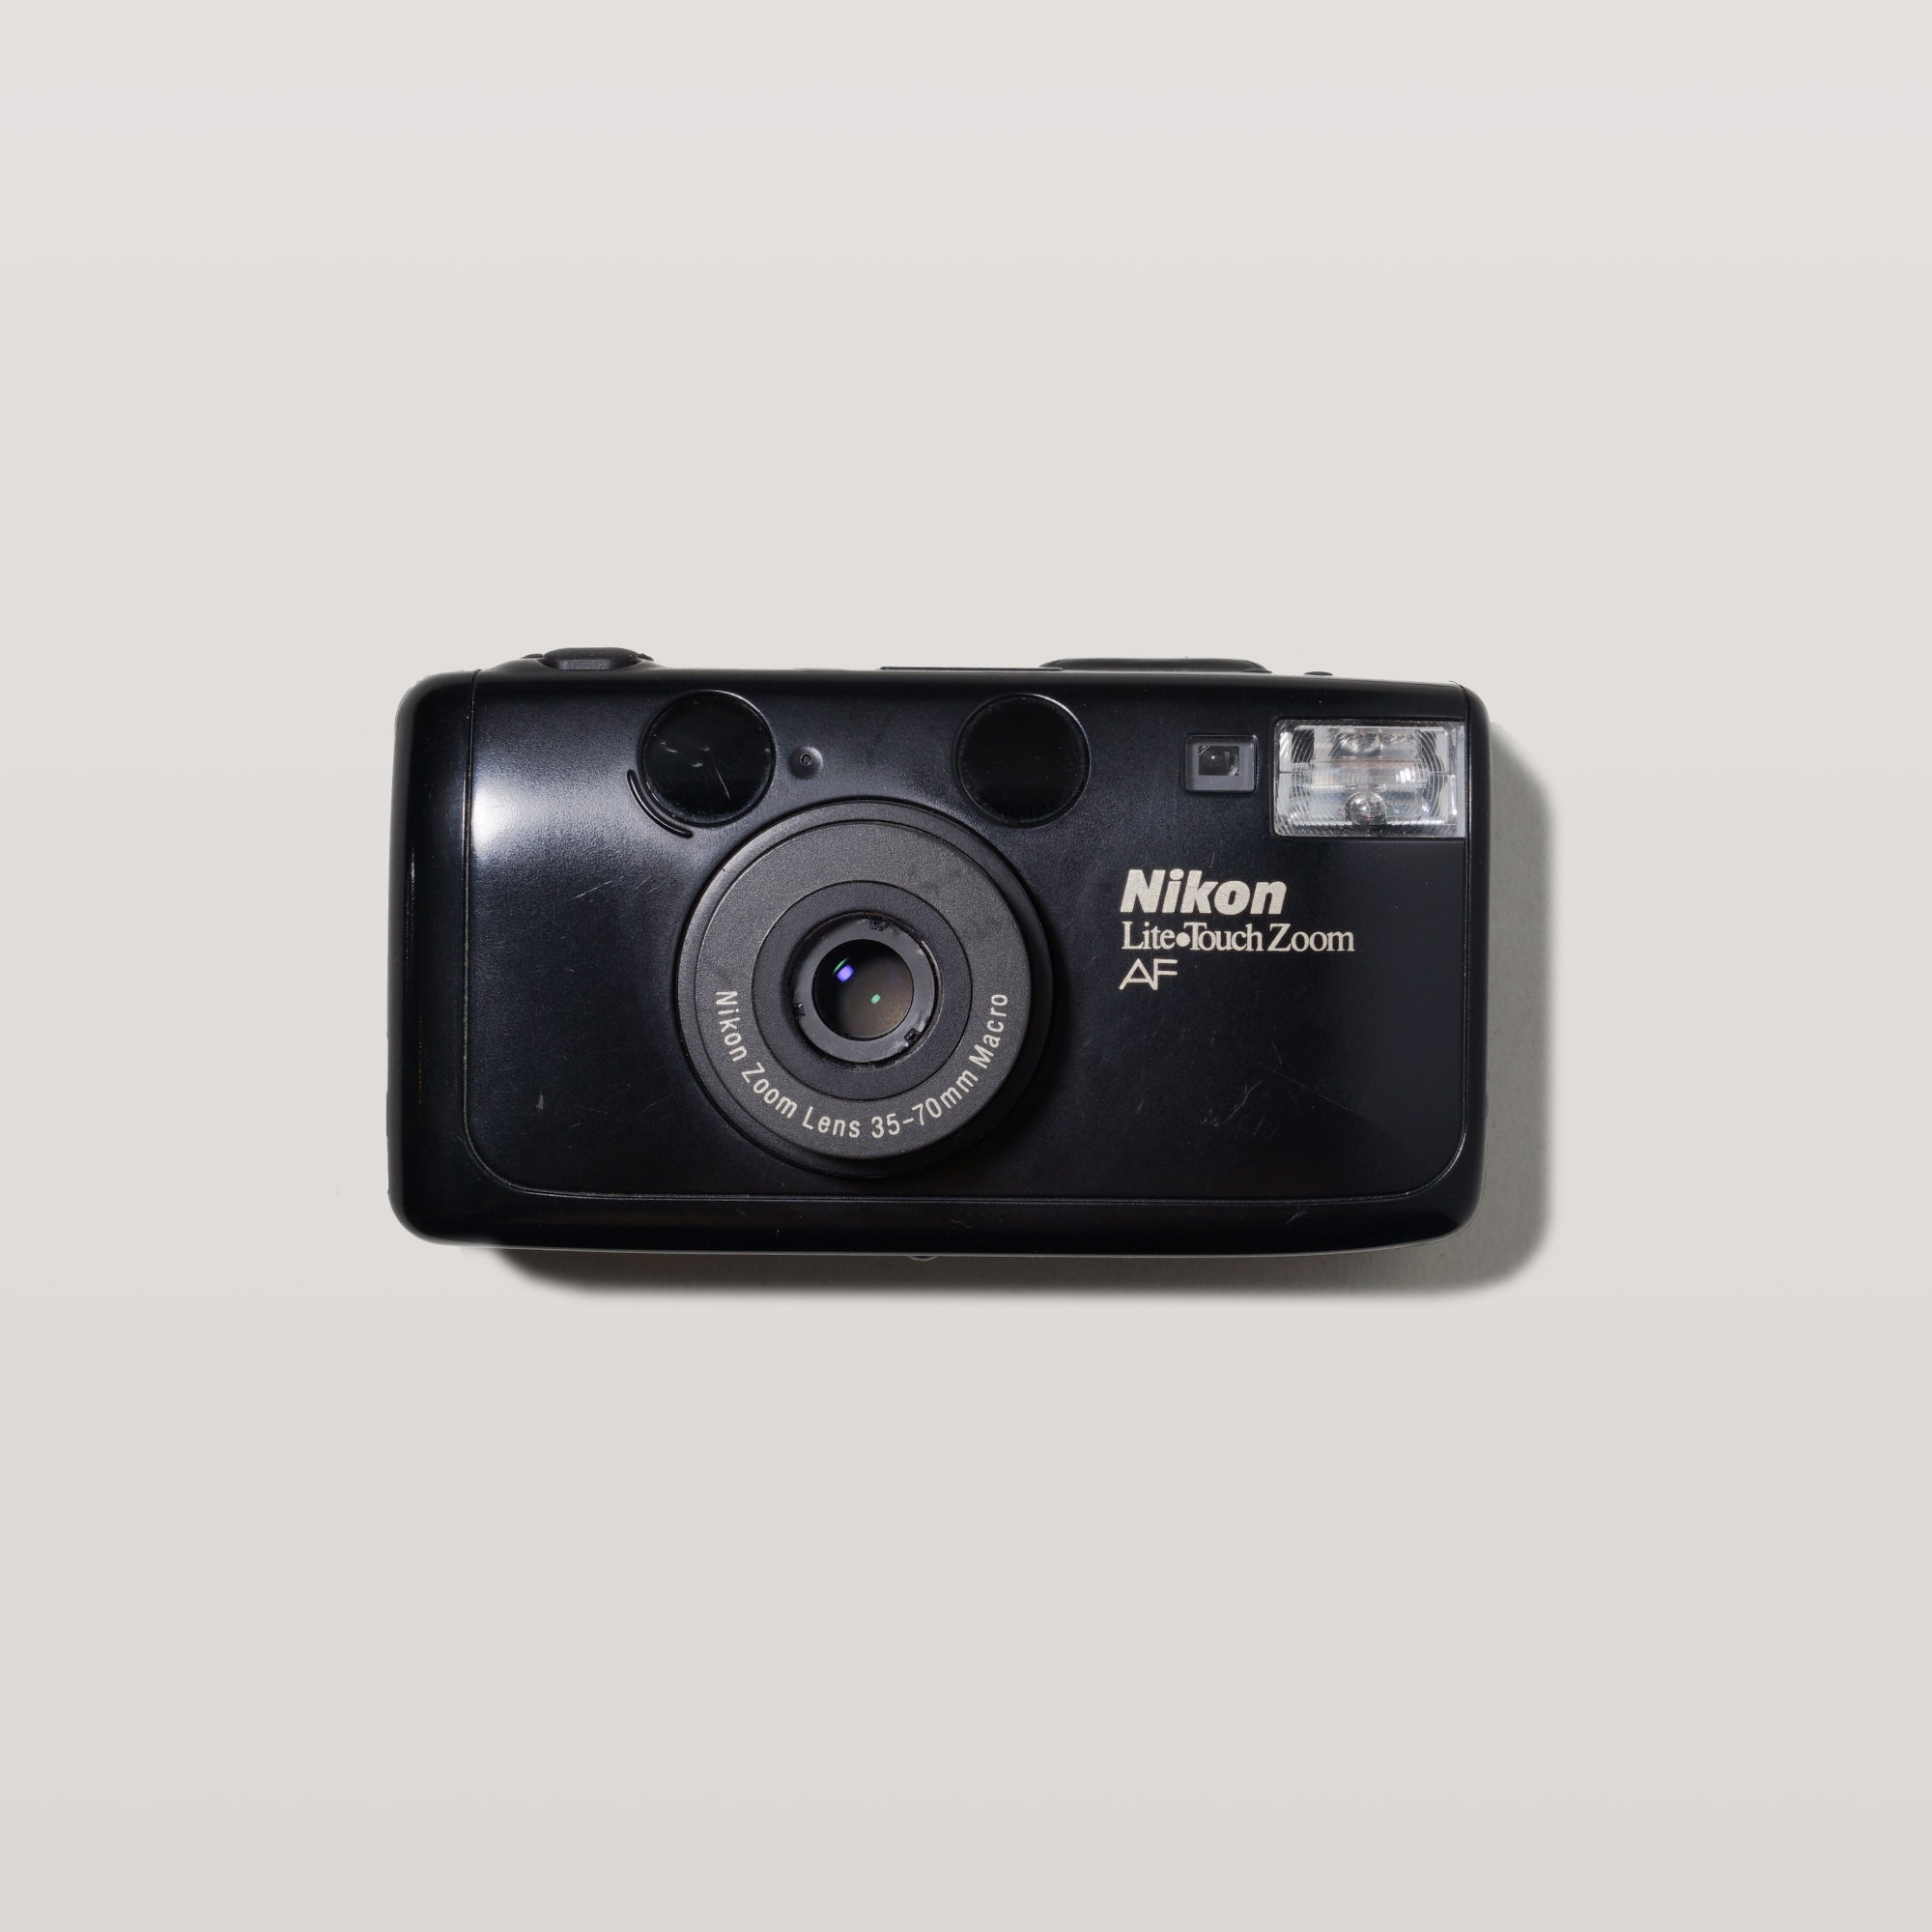 Buy Nikon Lite Touch Zoom AF now at Analogue Amsterdam